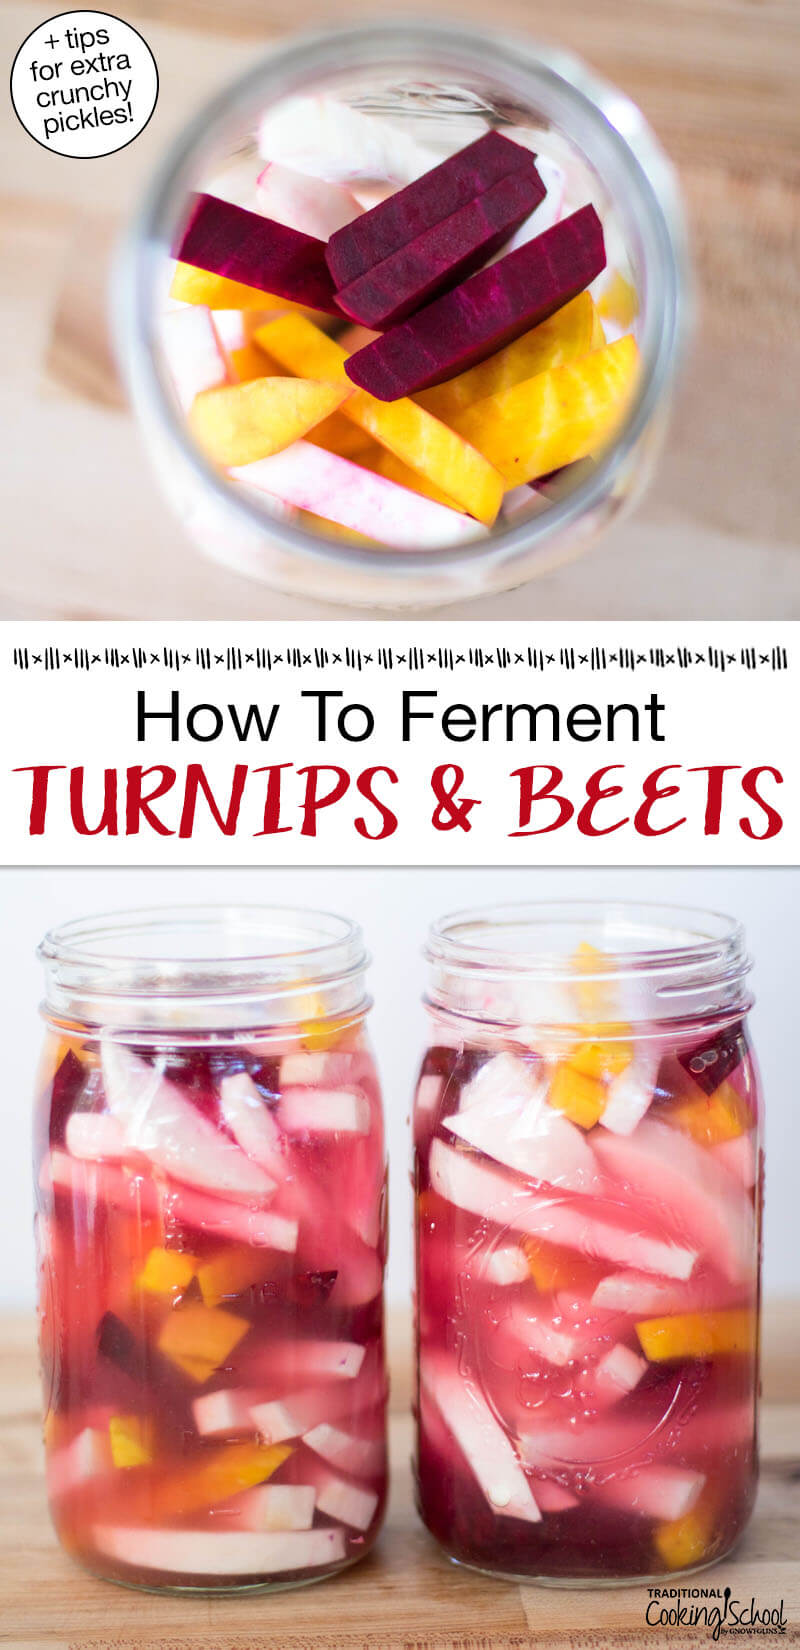 Photo collage of sliced turnips and beets in glass jars ready to be fermented. Text overlay says: "How To Ferment Turnips & Beets (+tips for extra crunchy pickles!)"